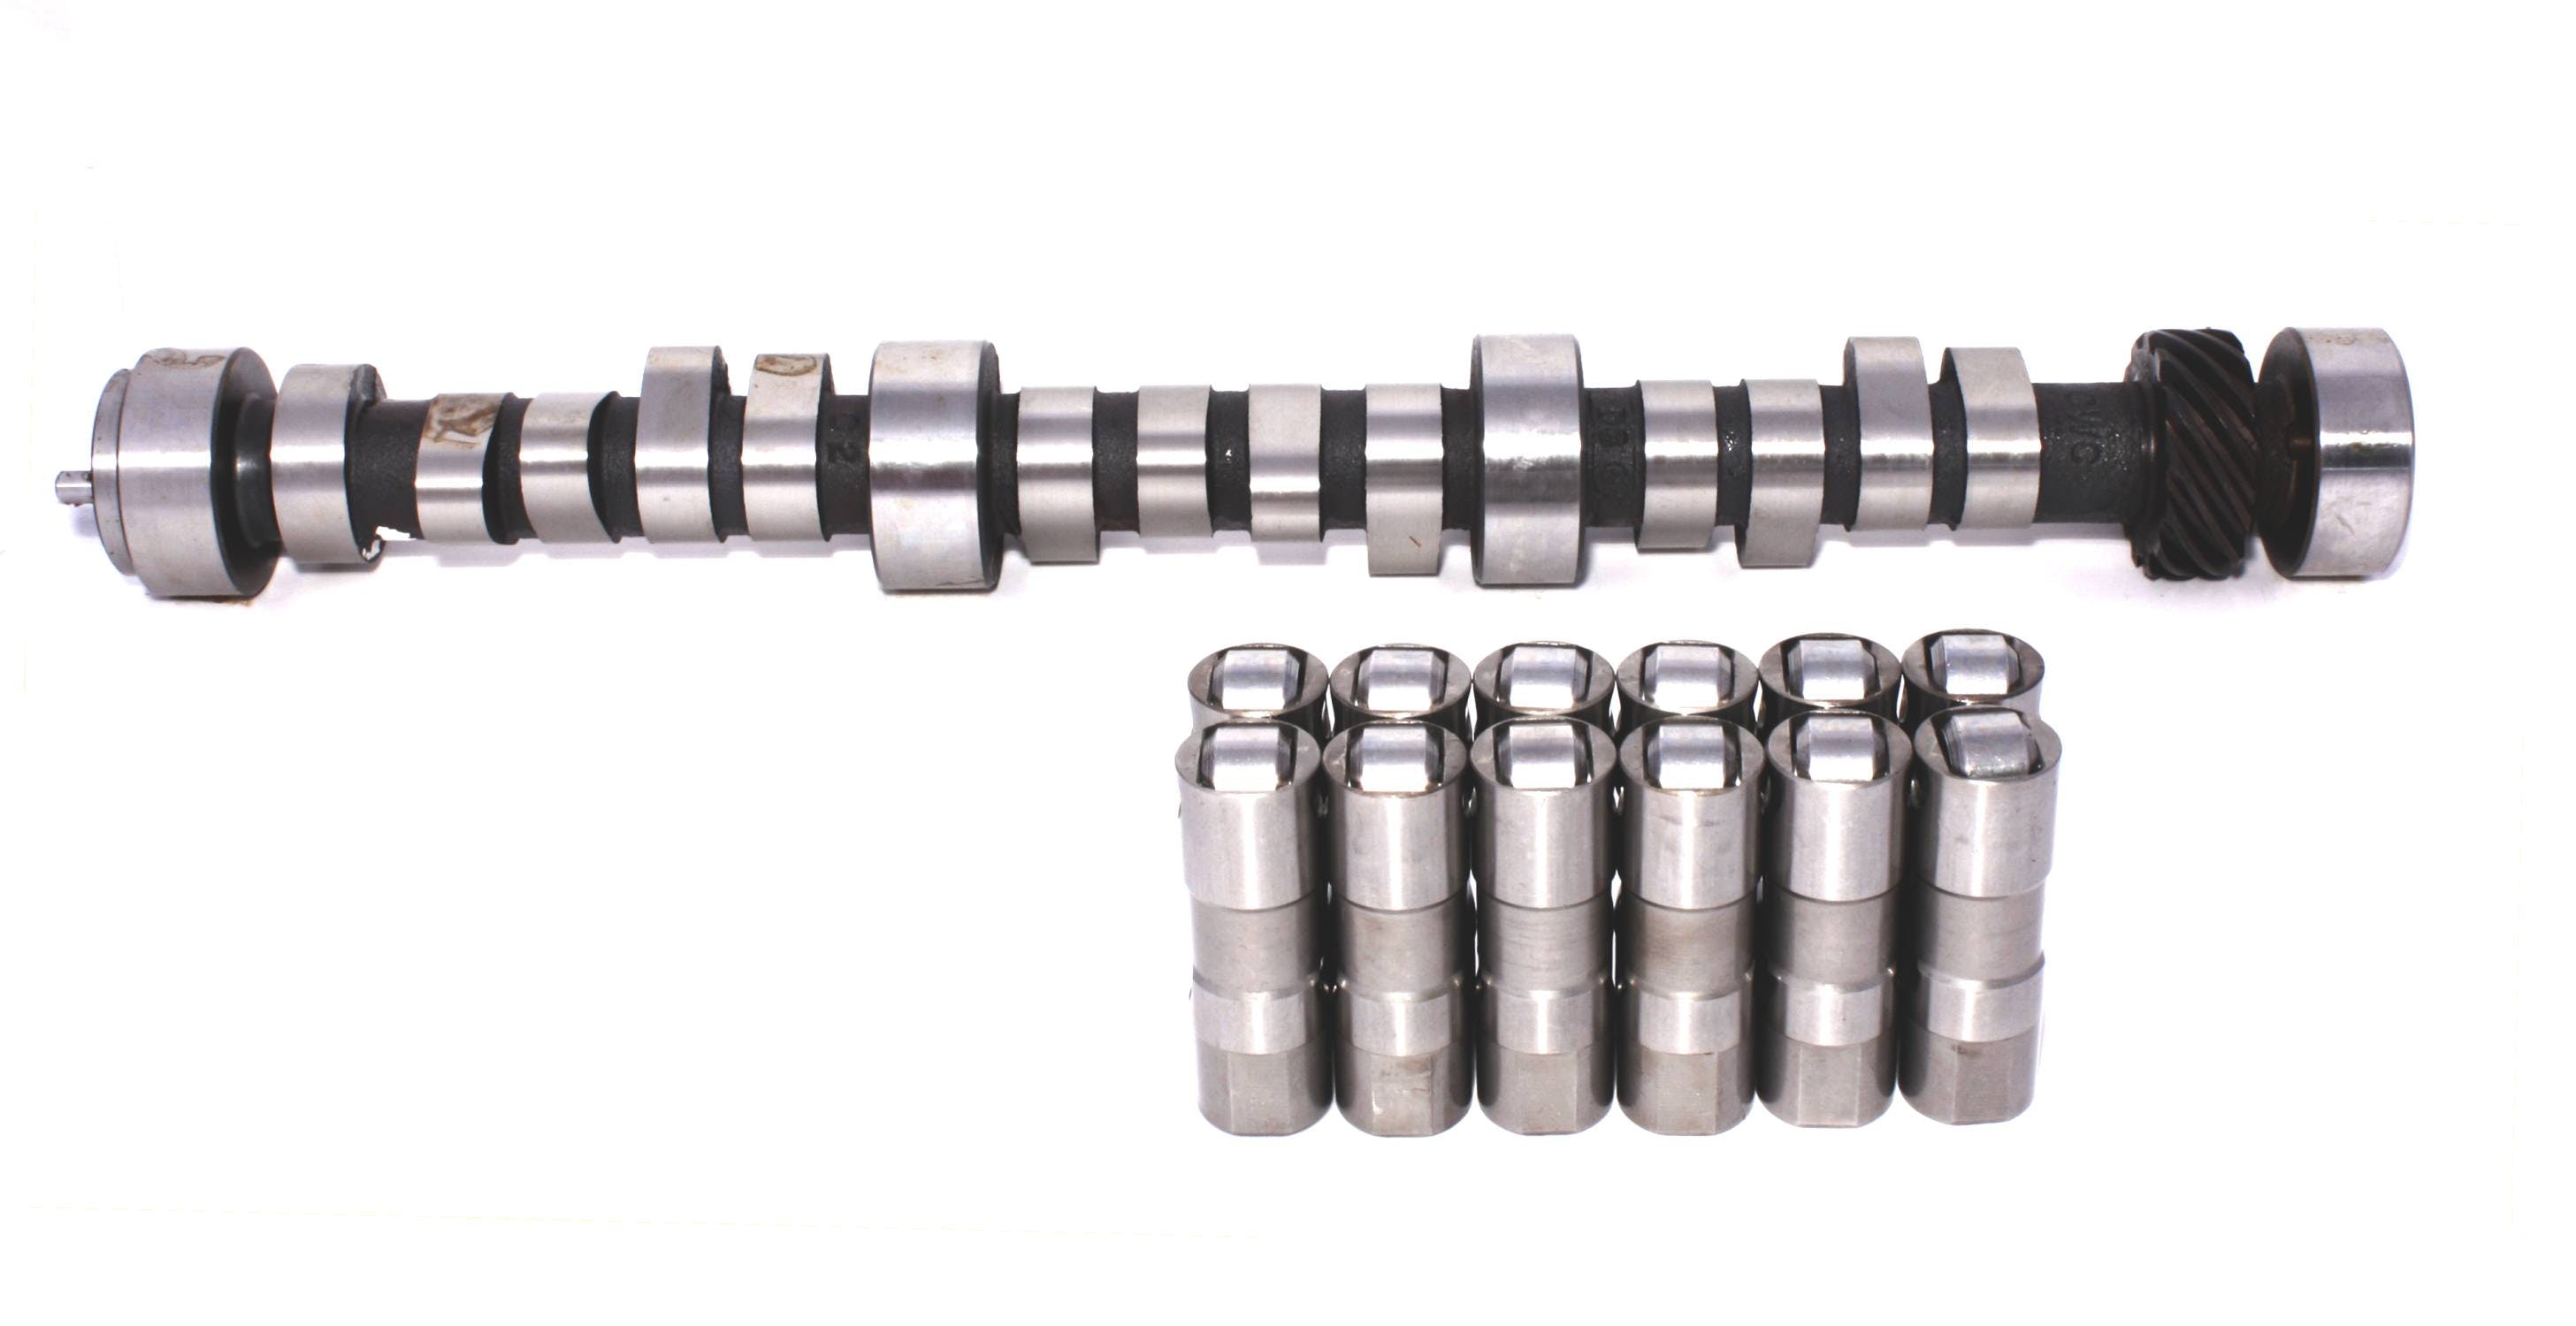 Competition Cams CL09-435-8 MAG COMPUTER CONTROL 200/206 HYDRAULIC ROLLER CAM/LIFTER KIT CHEVROLET 262/4.3L